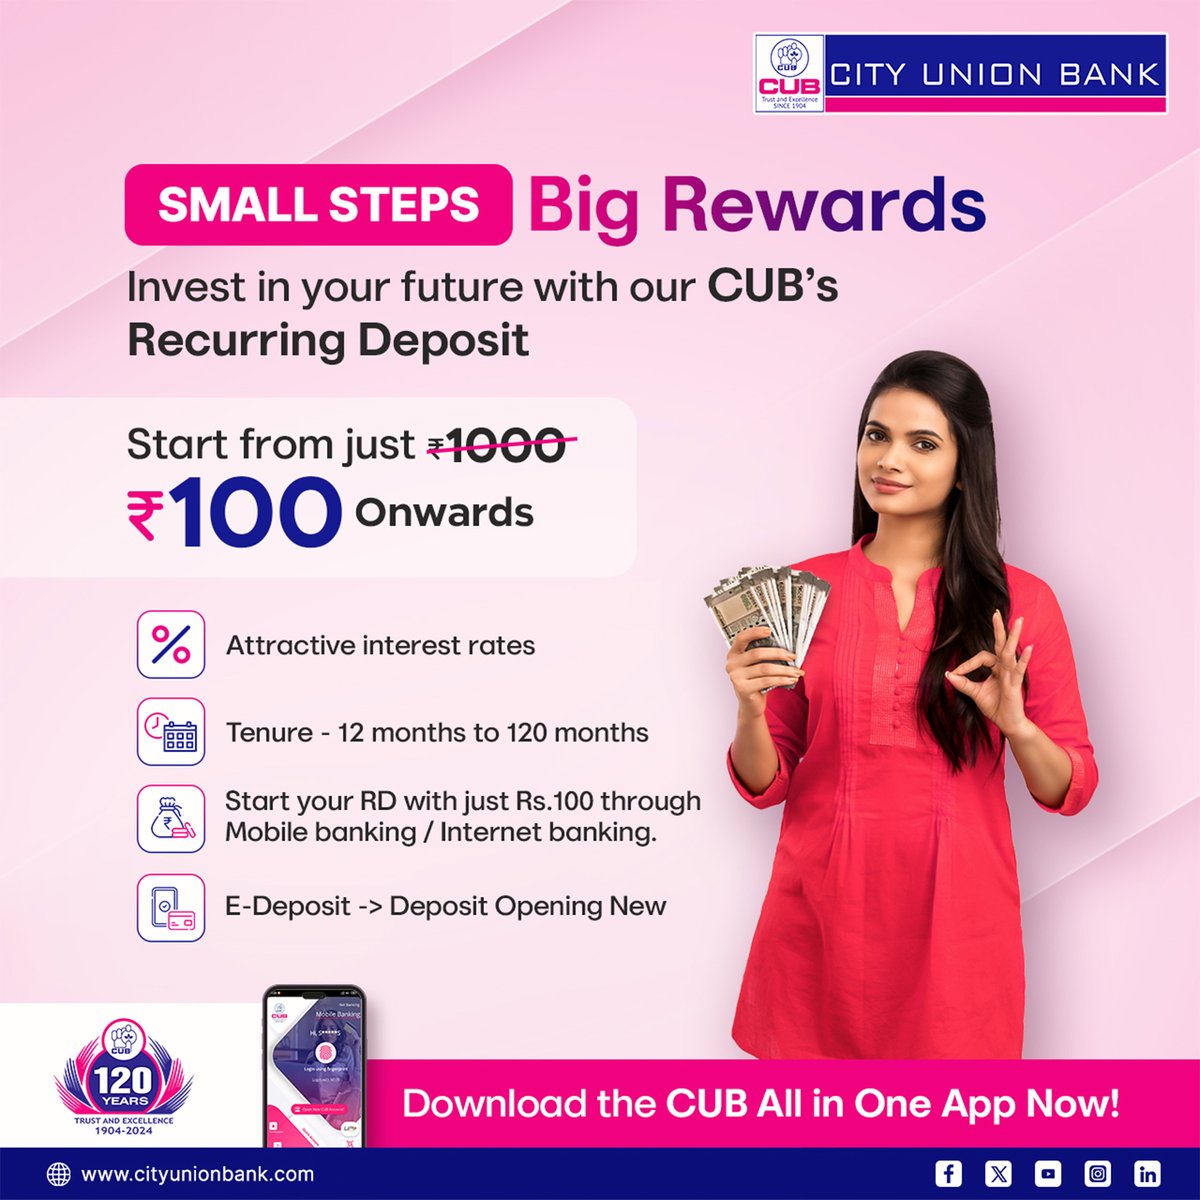 New year, New dreams; Make them a reality by investing in CUB Recurring Deposit Scheme

#120YearsBanking #Recurringdeposit #RD #Savings #Investment 
#cubltd #cityunionbank #CUBConvenientBanking